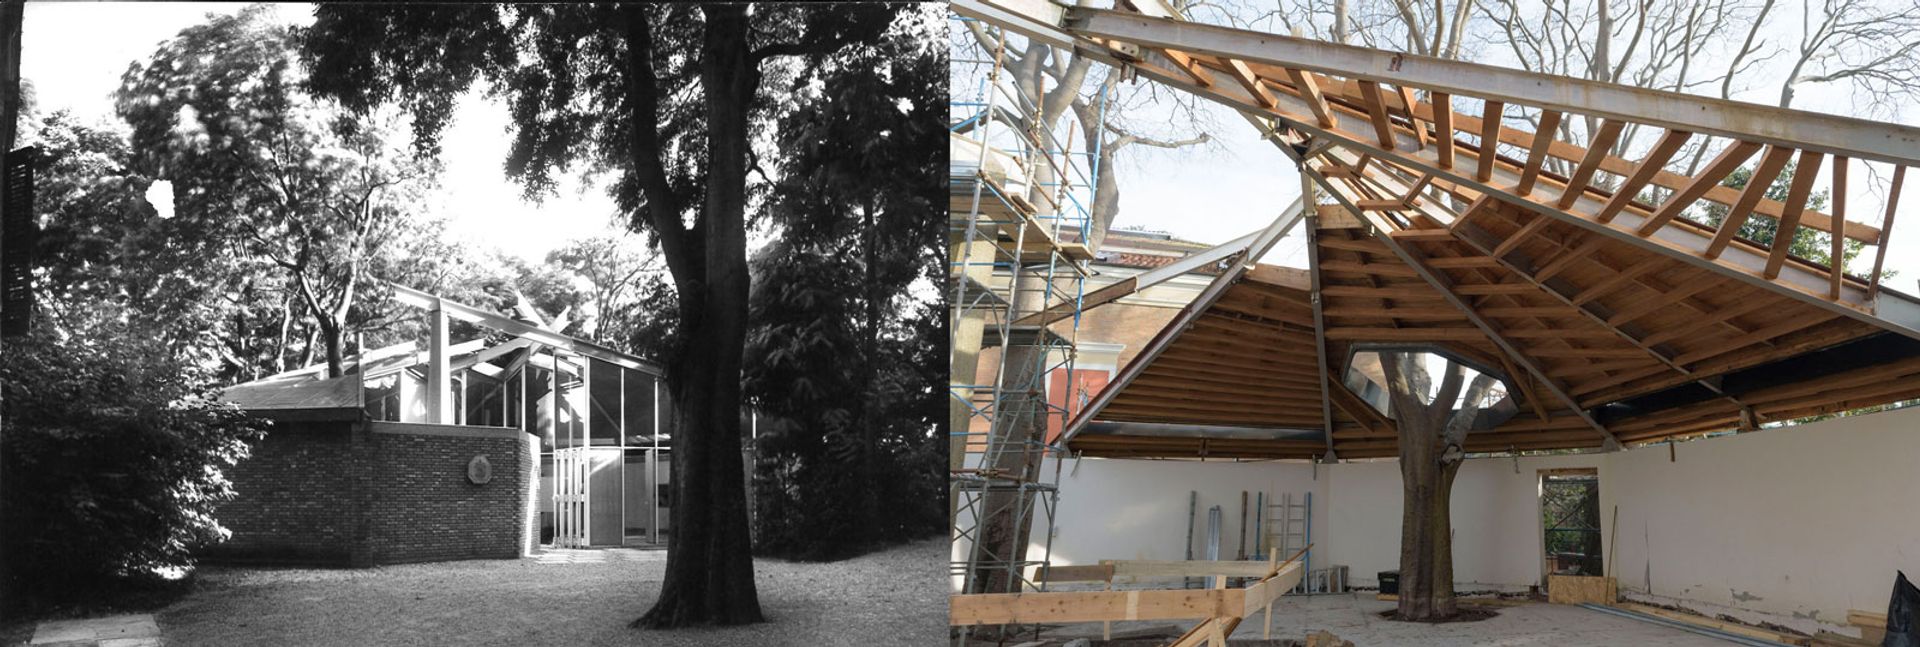 The Canada Pavilion when it was first built, around 1957 (left), and during its restoration in spring 2017 (right) Pavilion: NGC. Restoration: Francesco Barasciutti